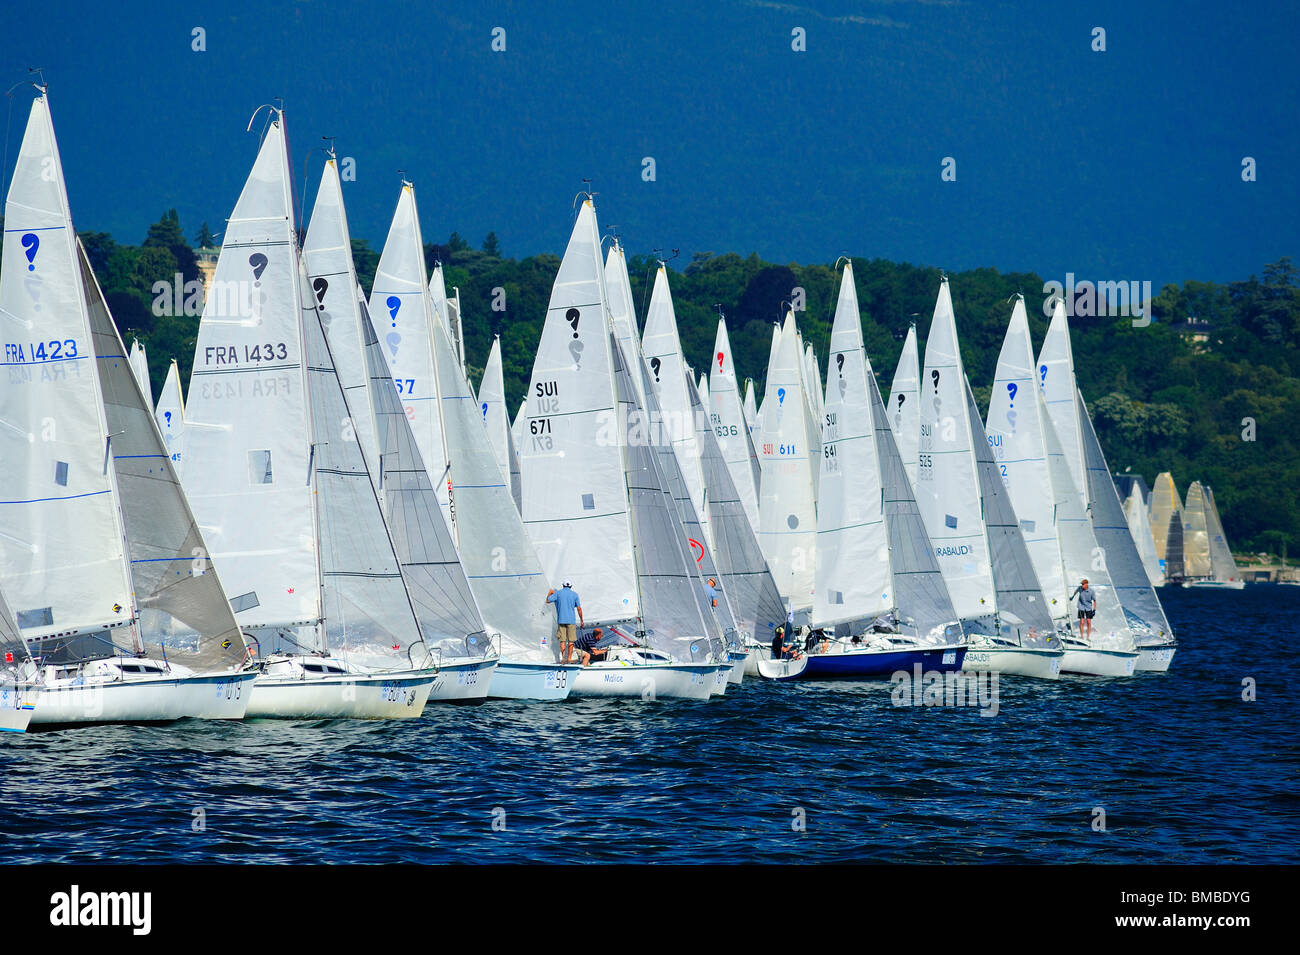 The start of the Bol d'Or yacht race on lac Leman (Lake Geneva) 2009. Space for text in the sky. Stock Photo